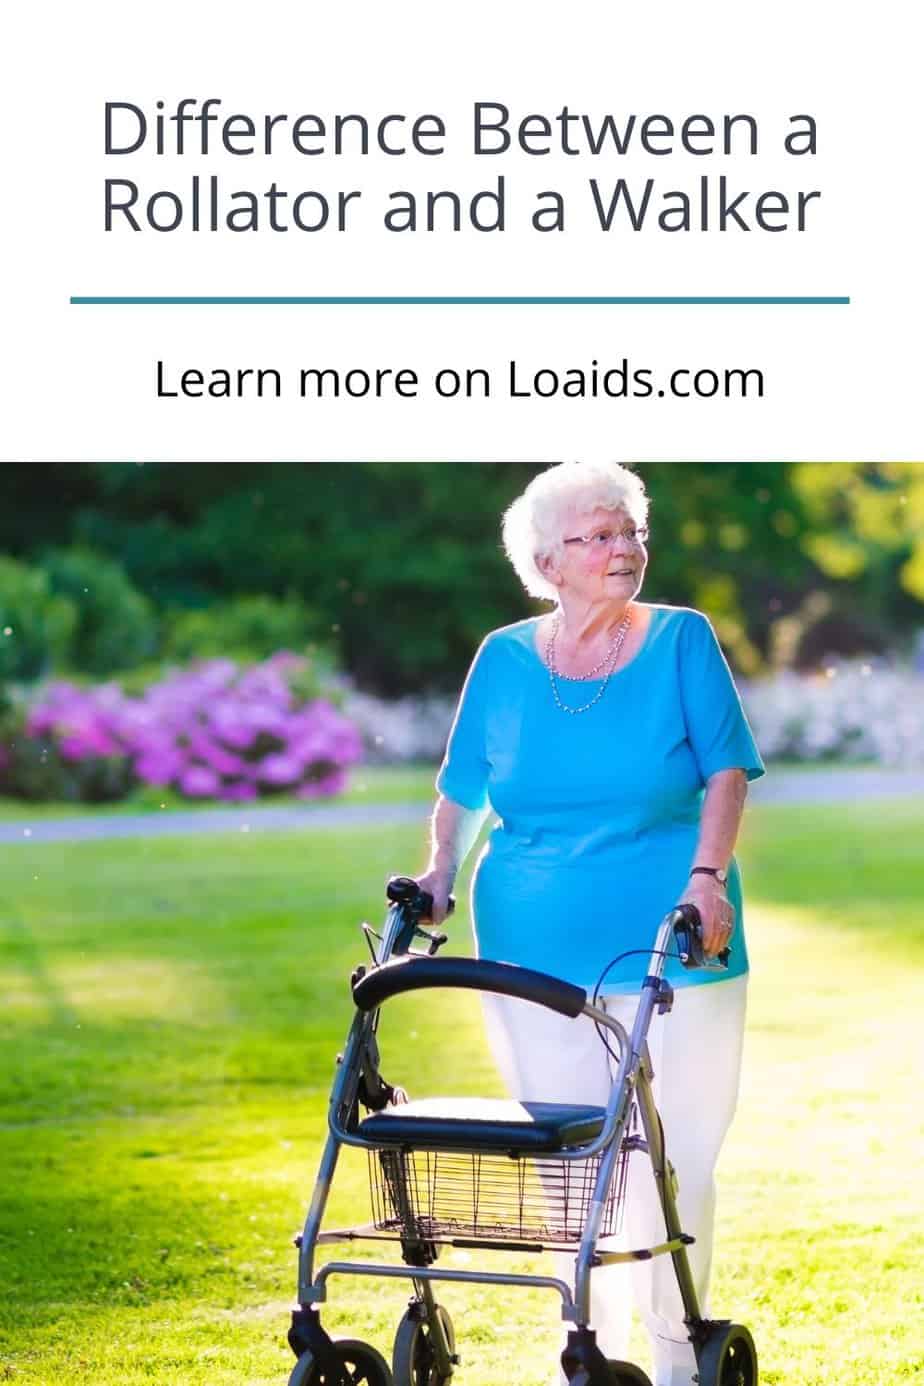 senior woman using a rollator to walk at the park